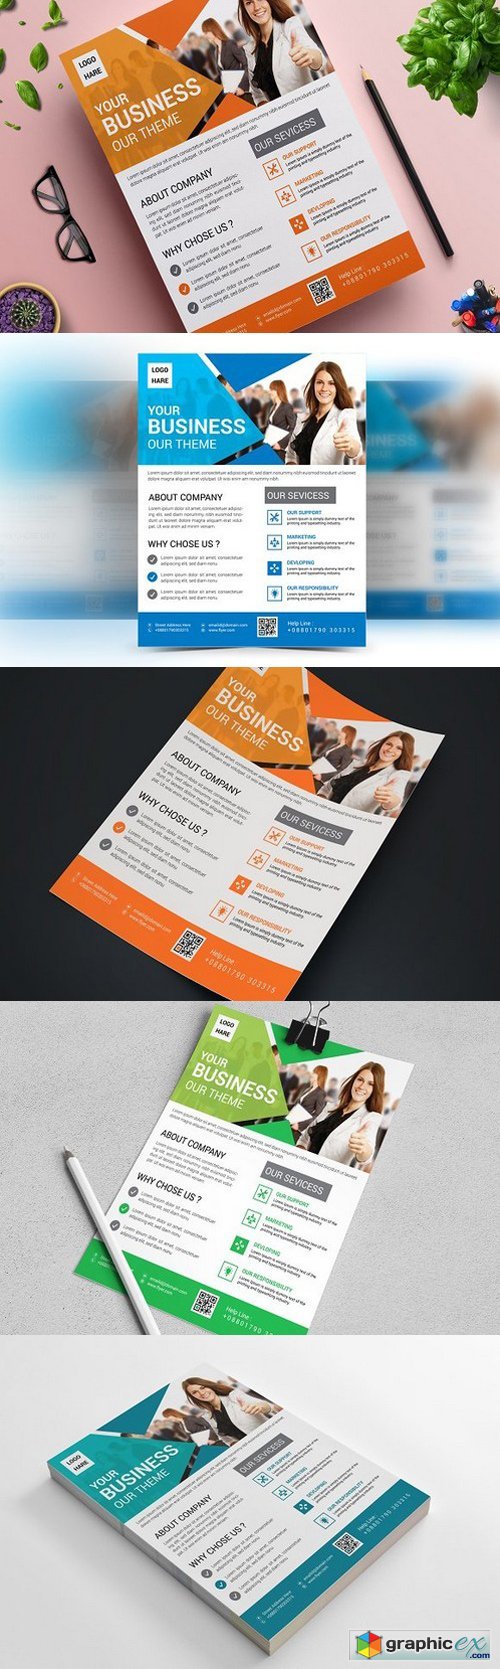 Corporate Business Flyer | Vol. 15